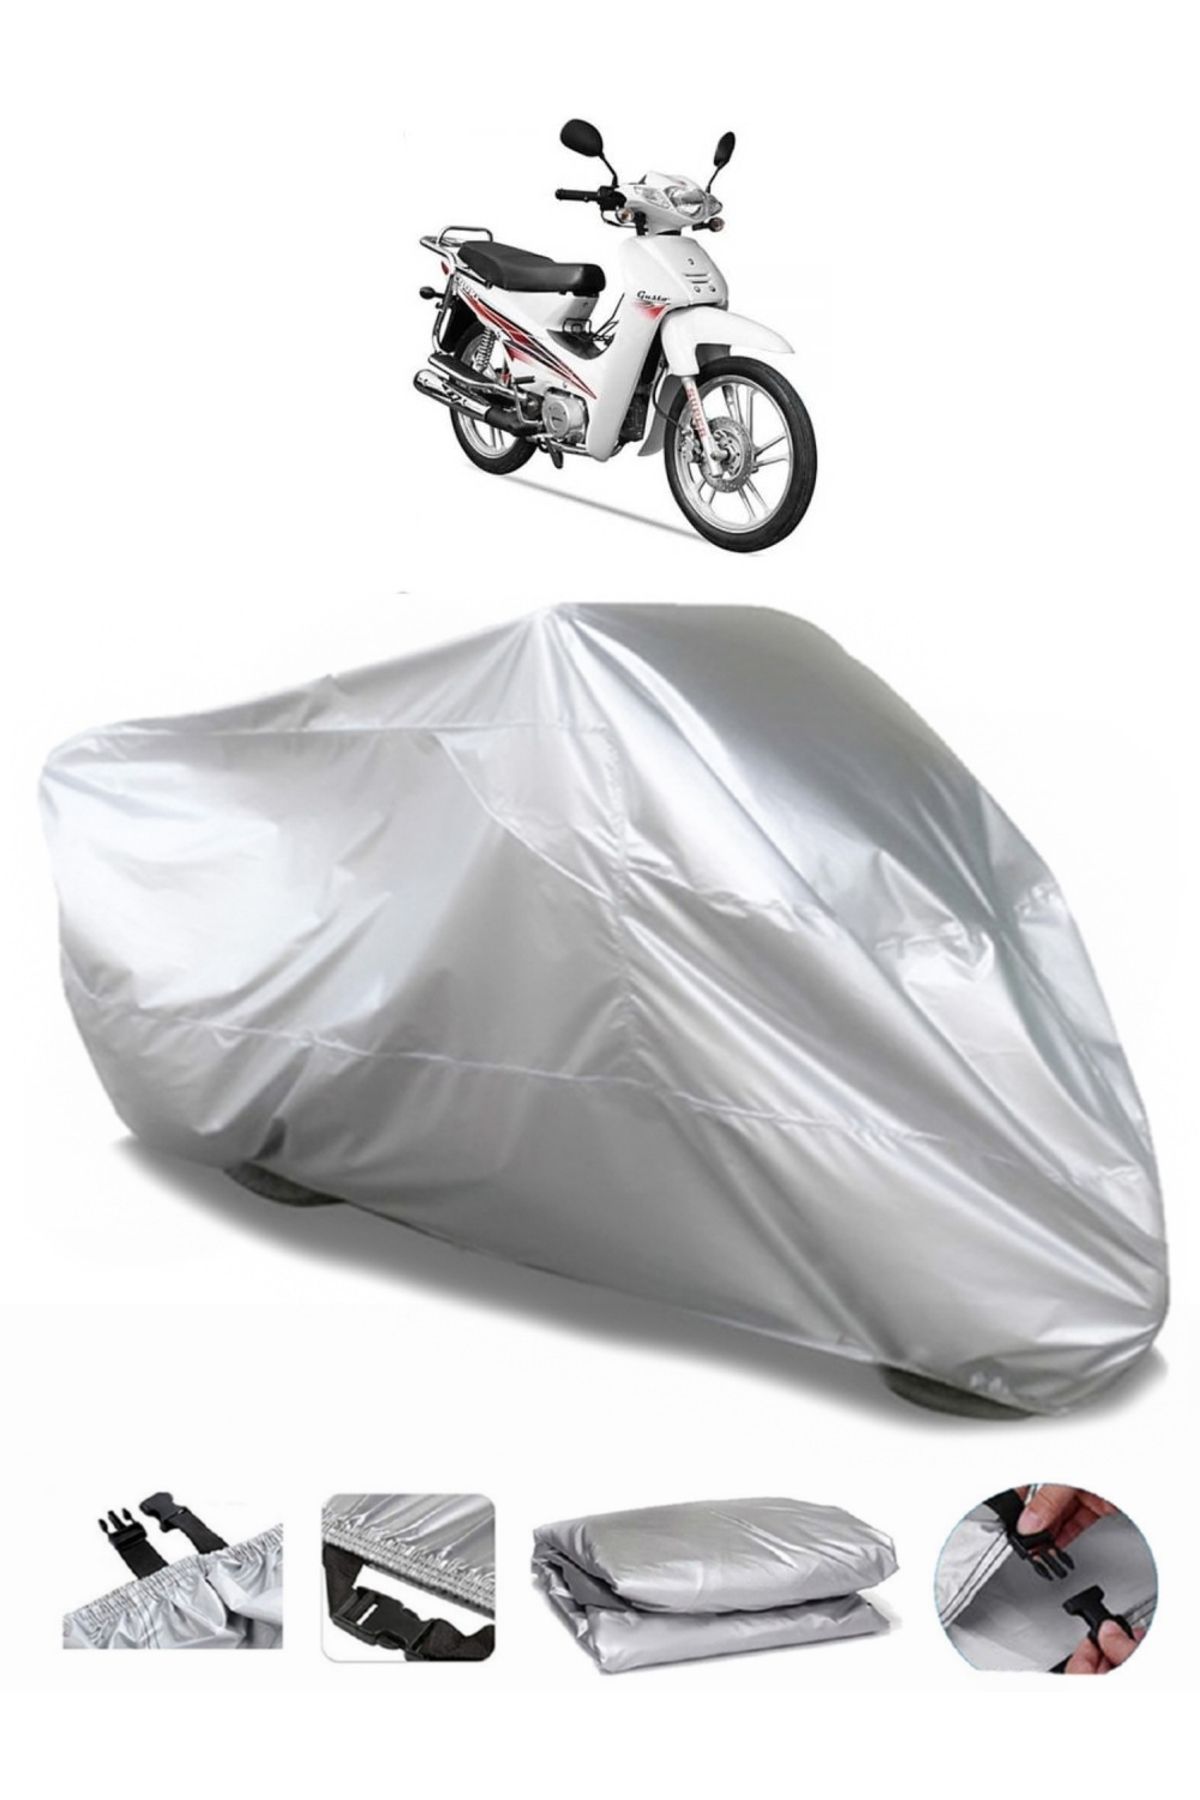 CoverPlus Yuki YK-100-7A Gusto Motorcycle Cover Outdoor Uv Protector Rain Covers